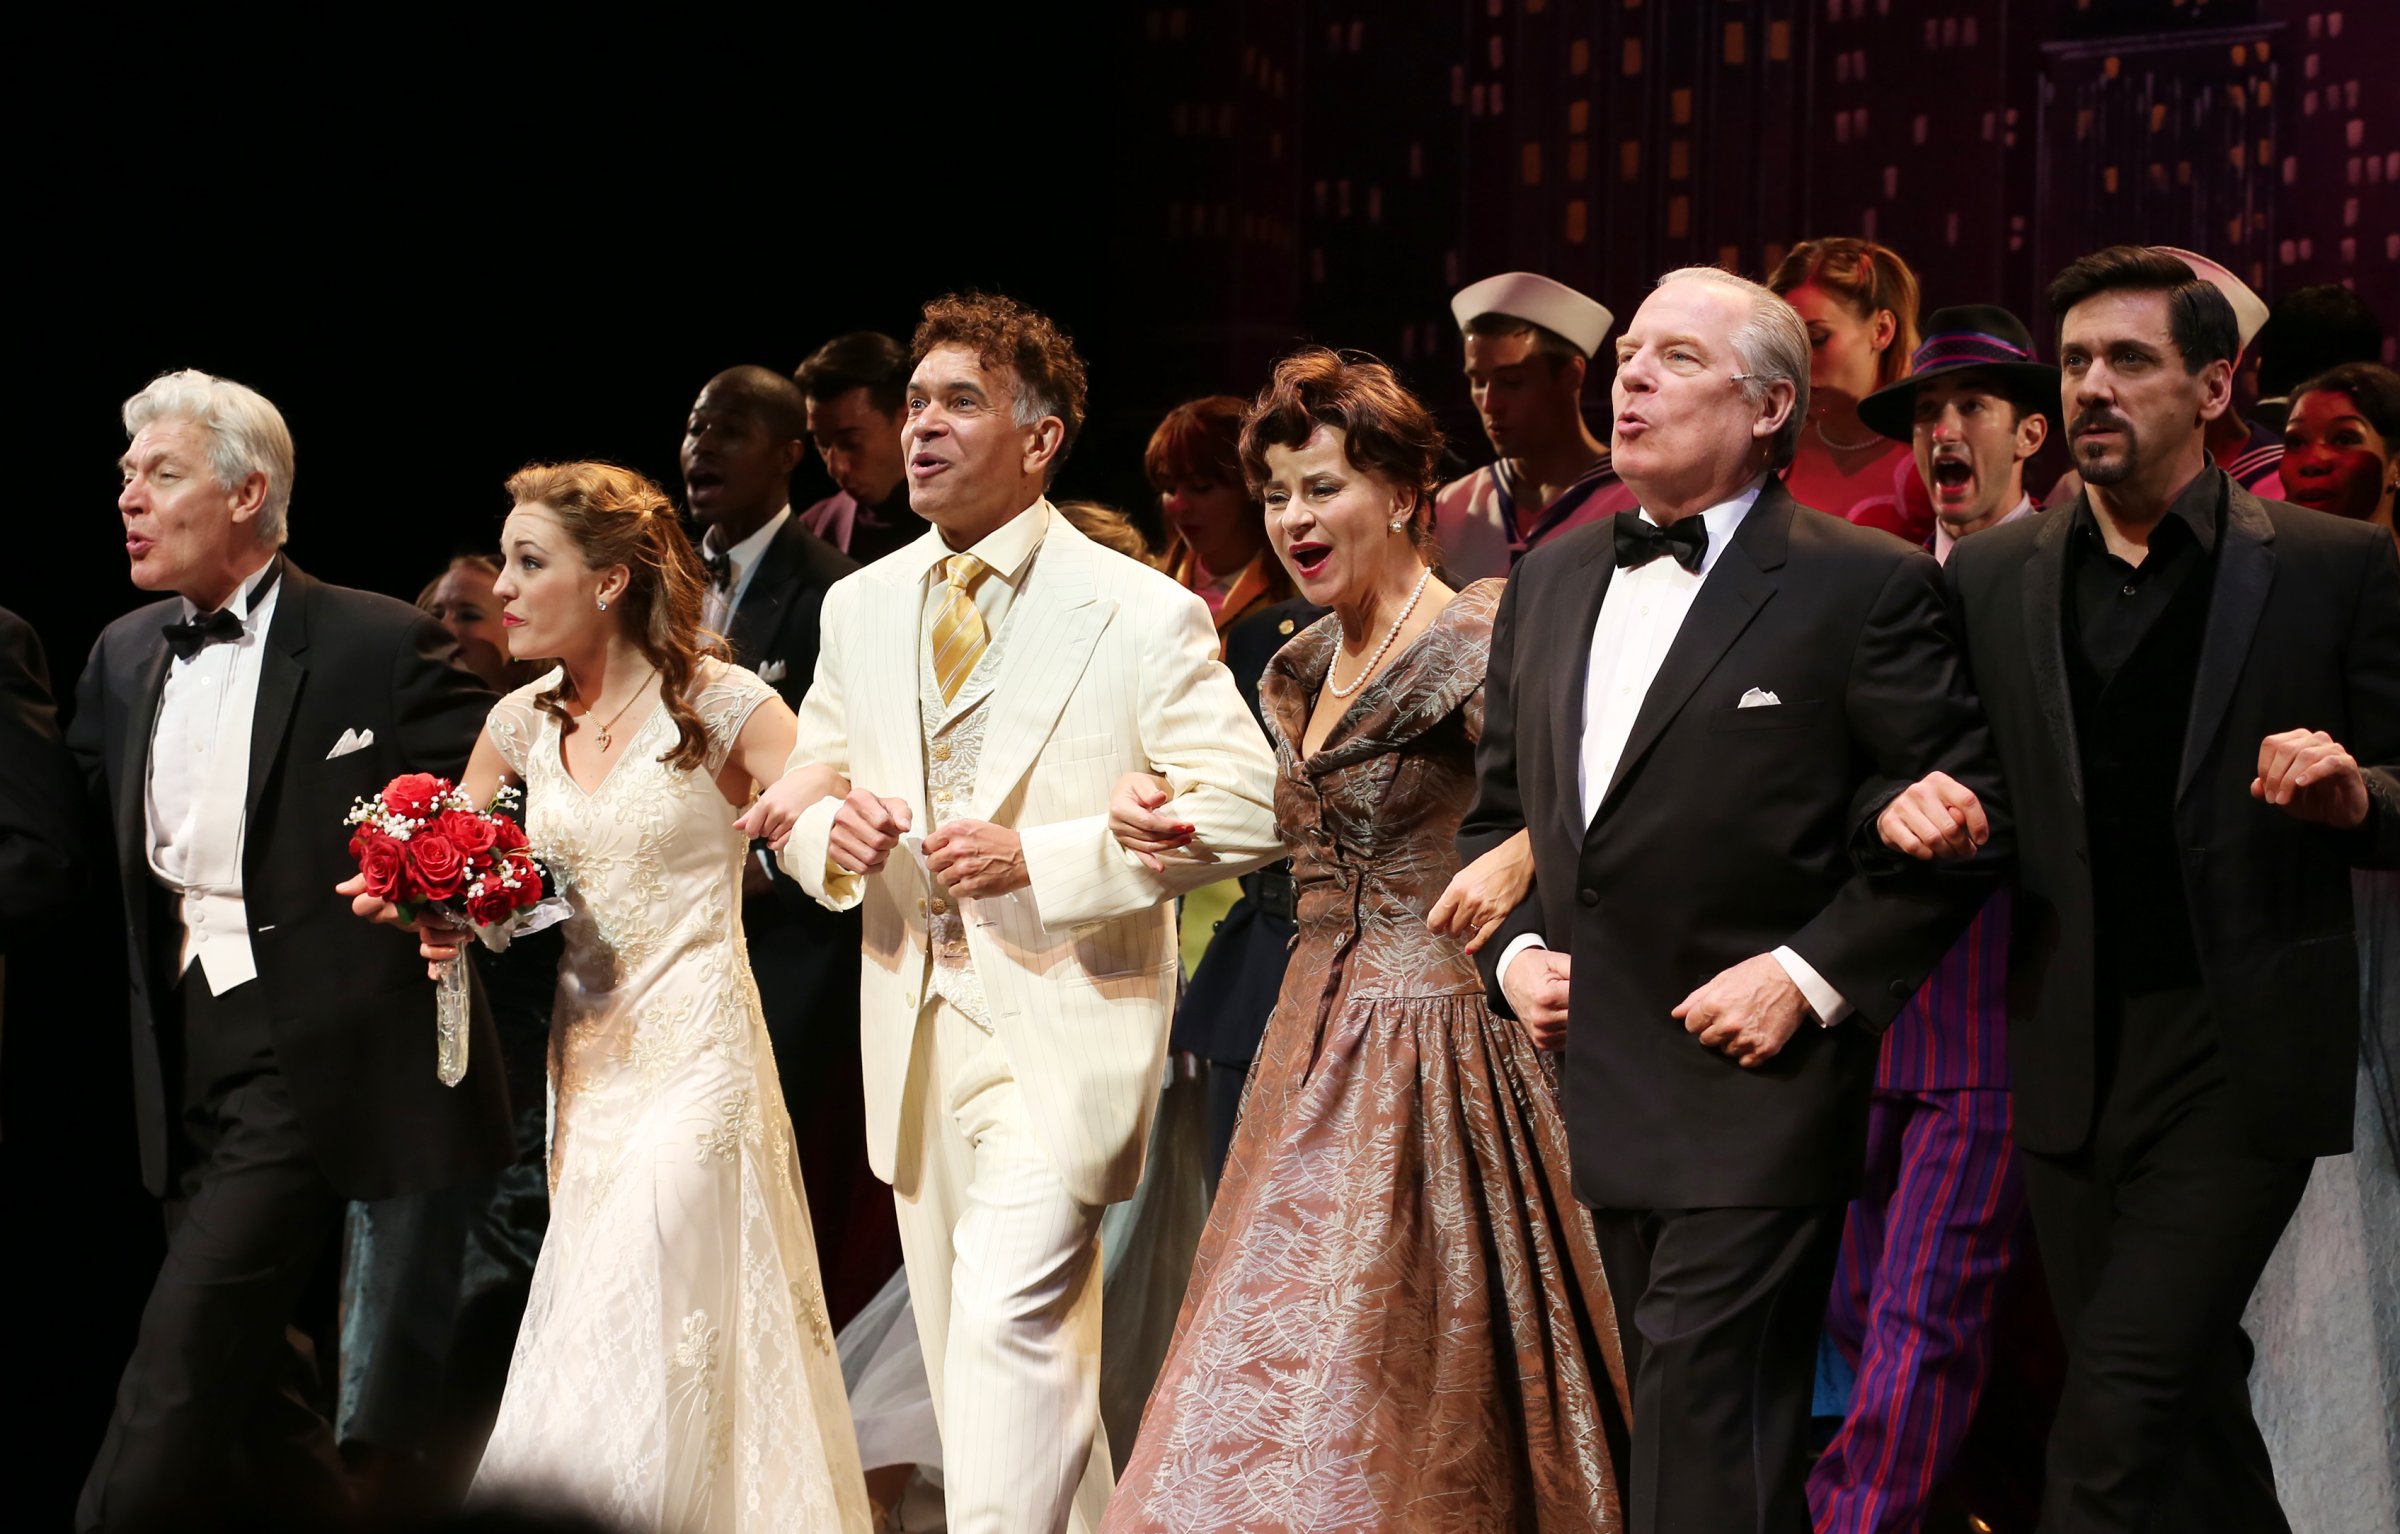 The cast of 'The Band Wagon' during the Curtain Call on Nov. 9, 2014 in New York City.